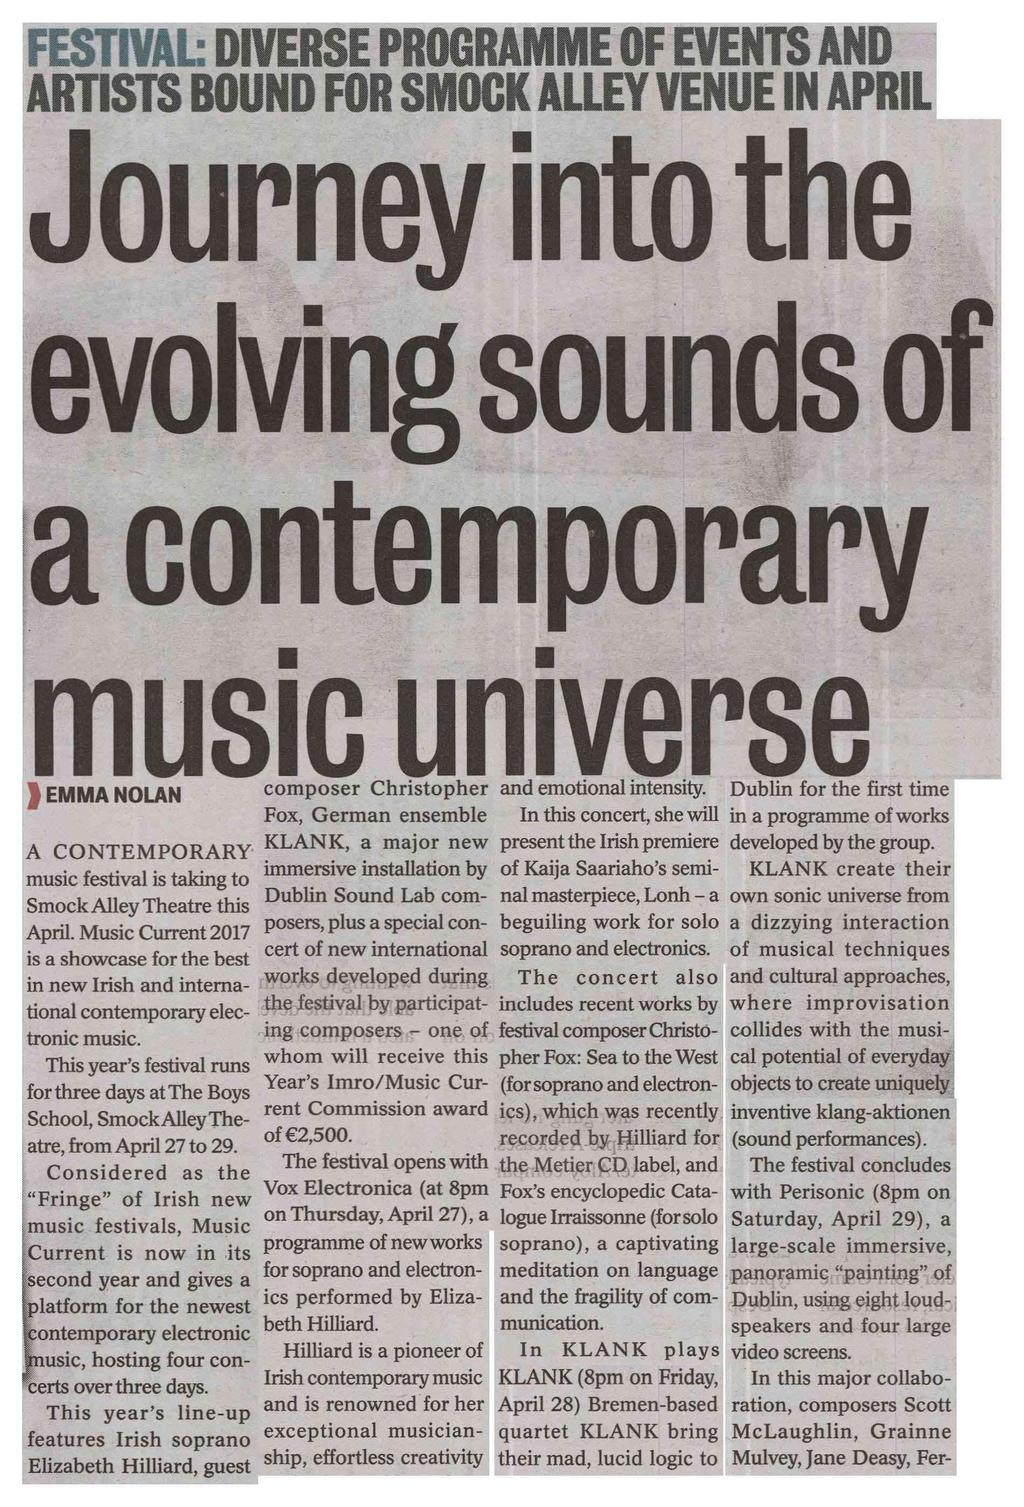 Dun Laoghaire Gazette* -27- Area of Clip: 79500mm² Page 1 of 3 FESTIVAL DIVERSE PROGRAMME OF EVENTS AND ARTISTS BOUND FOR SMOCK ALLEY VENUE IN APRIL Journgy into the evolving sounds of a contemporary